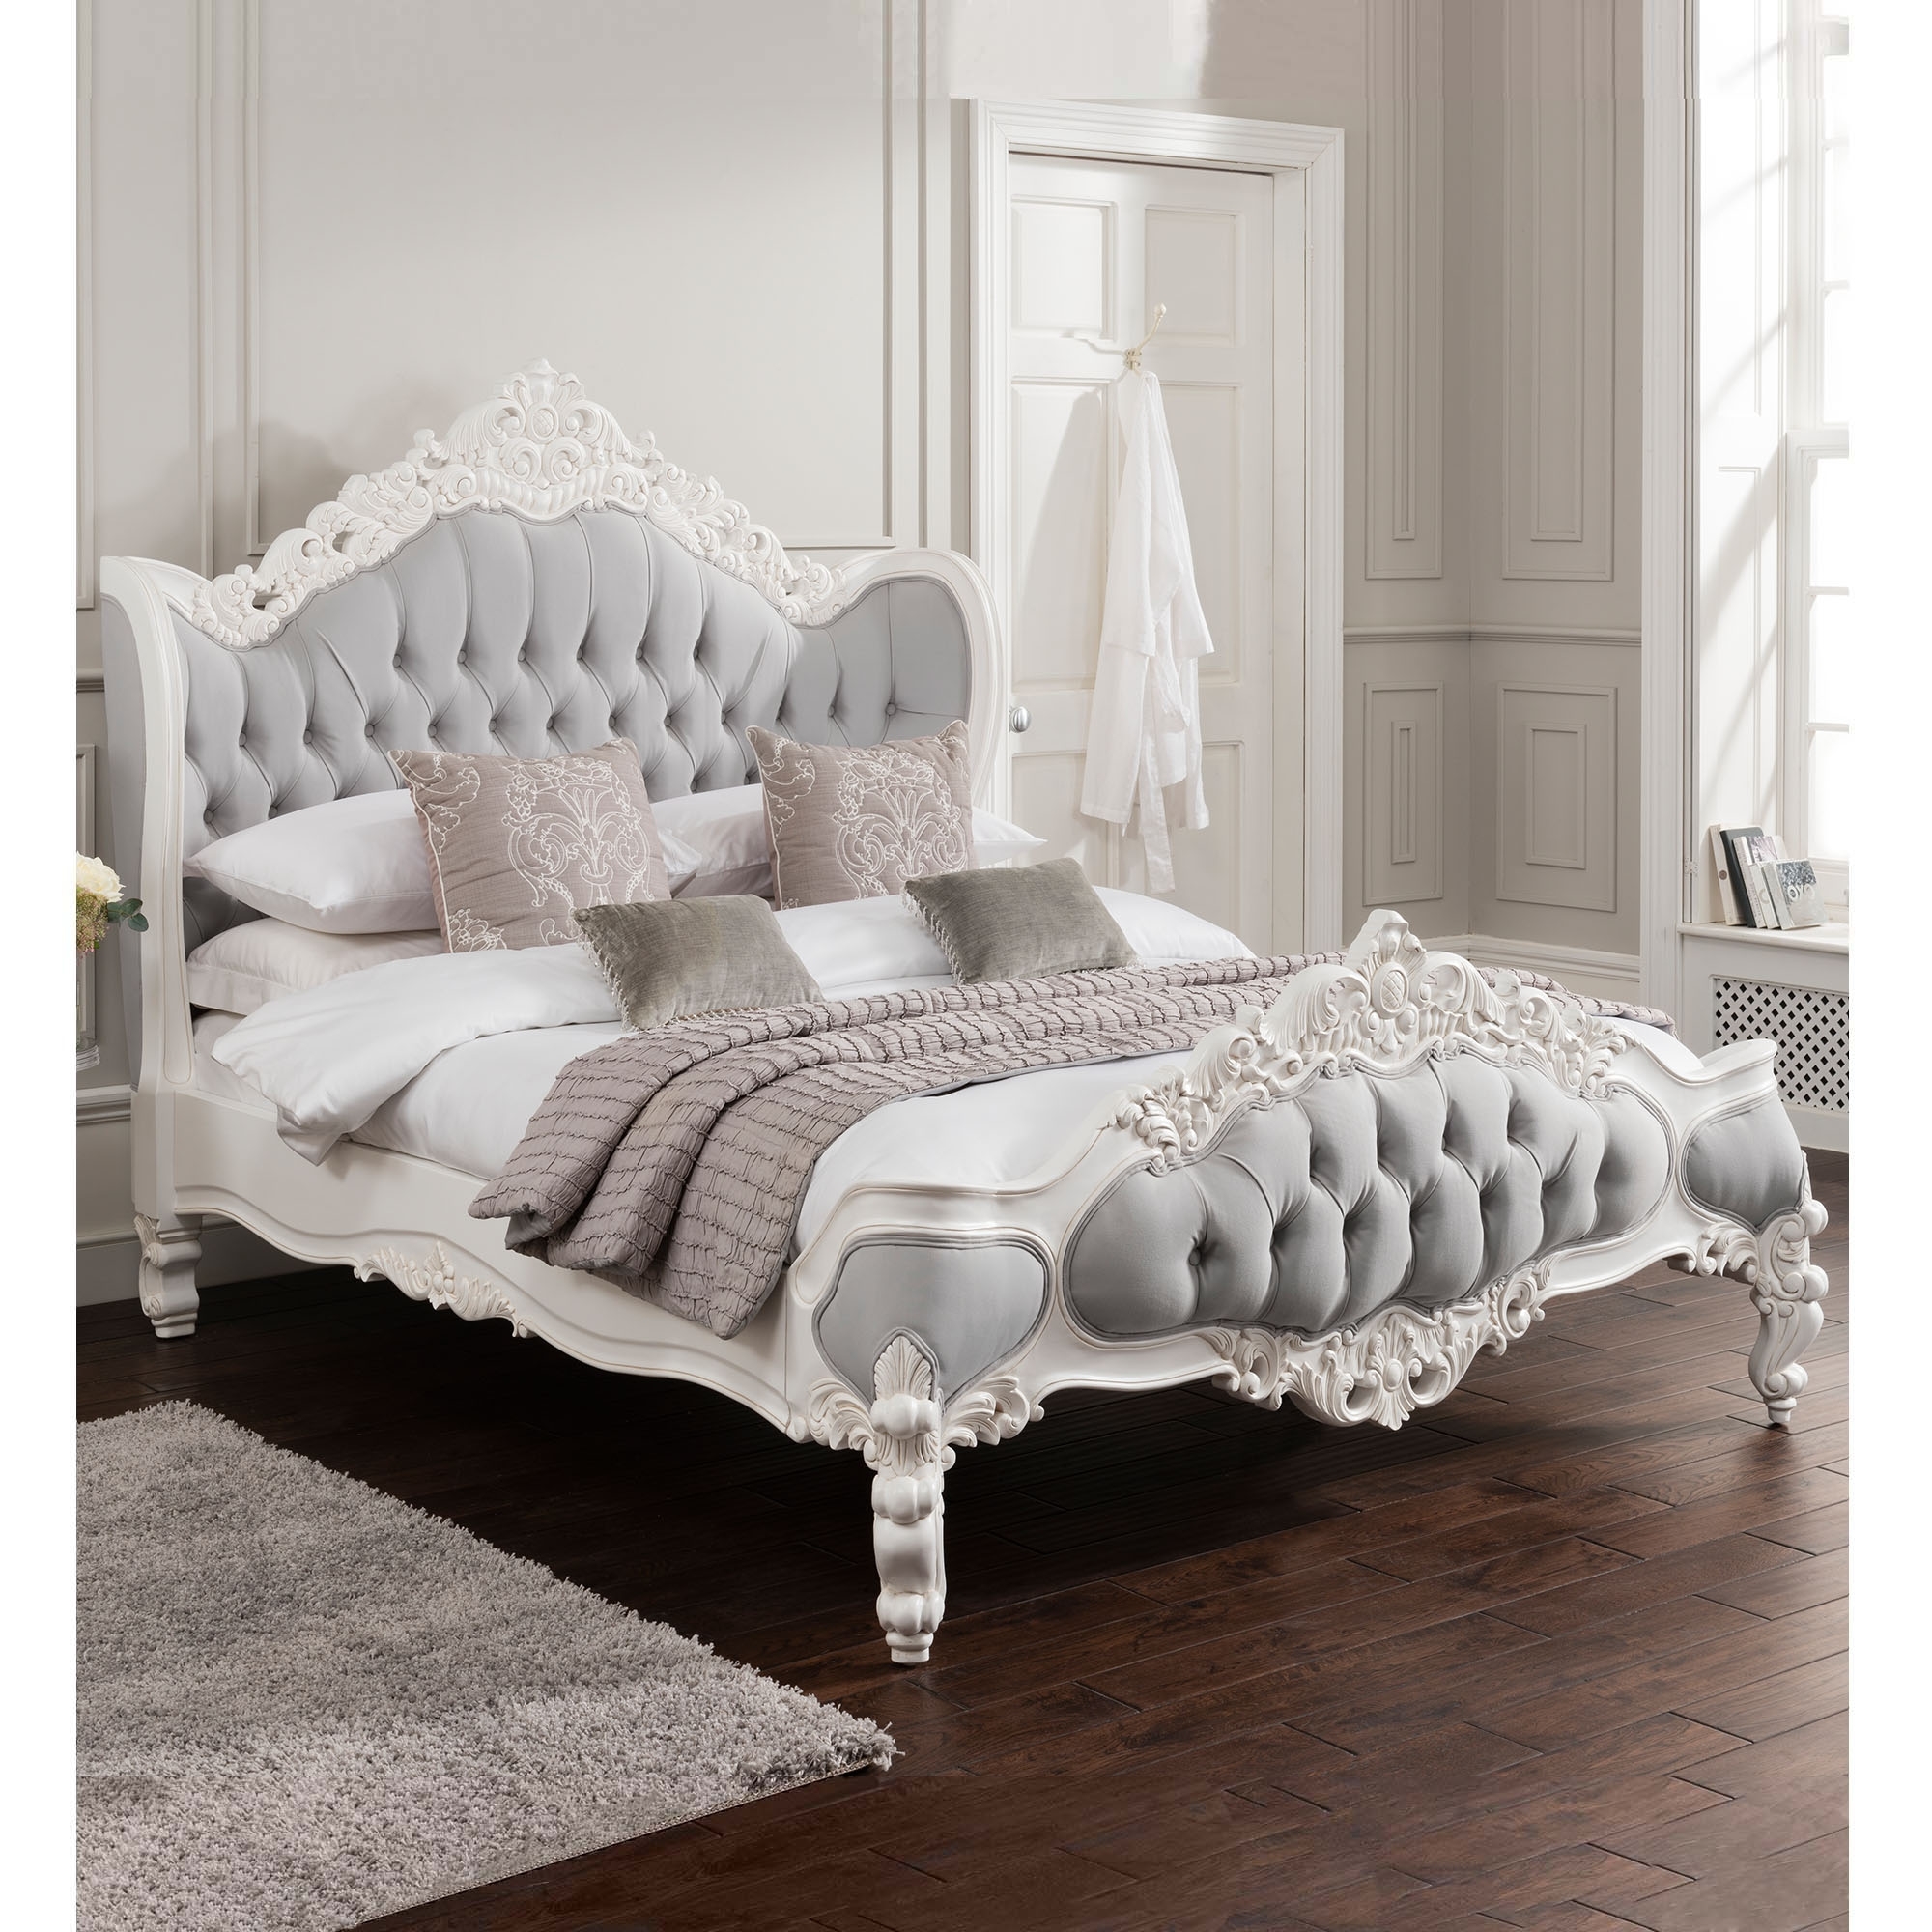 French bedroom furniture antique french style bed shabby chic bedroom furniture french style bedroom  furniture JTSQWIH